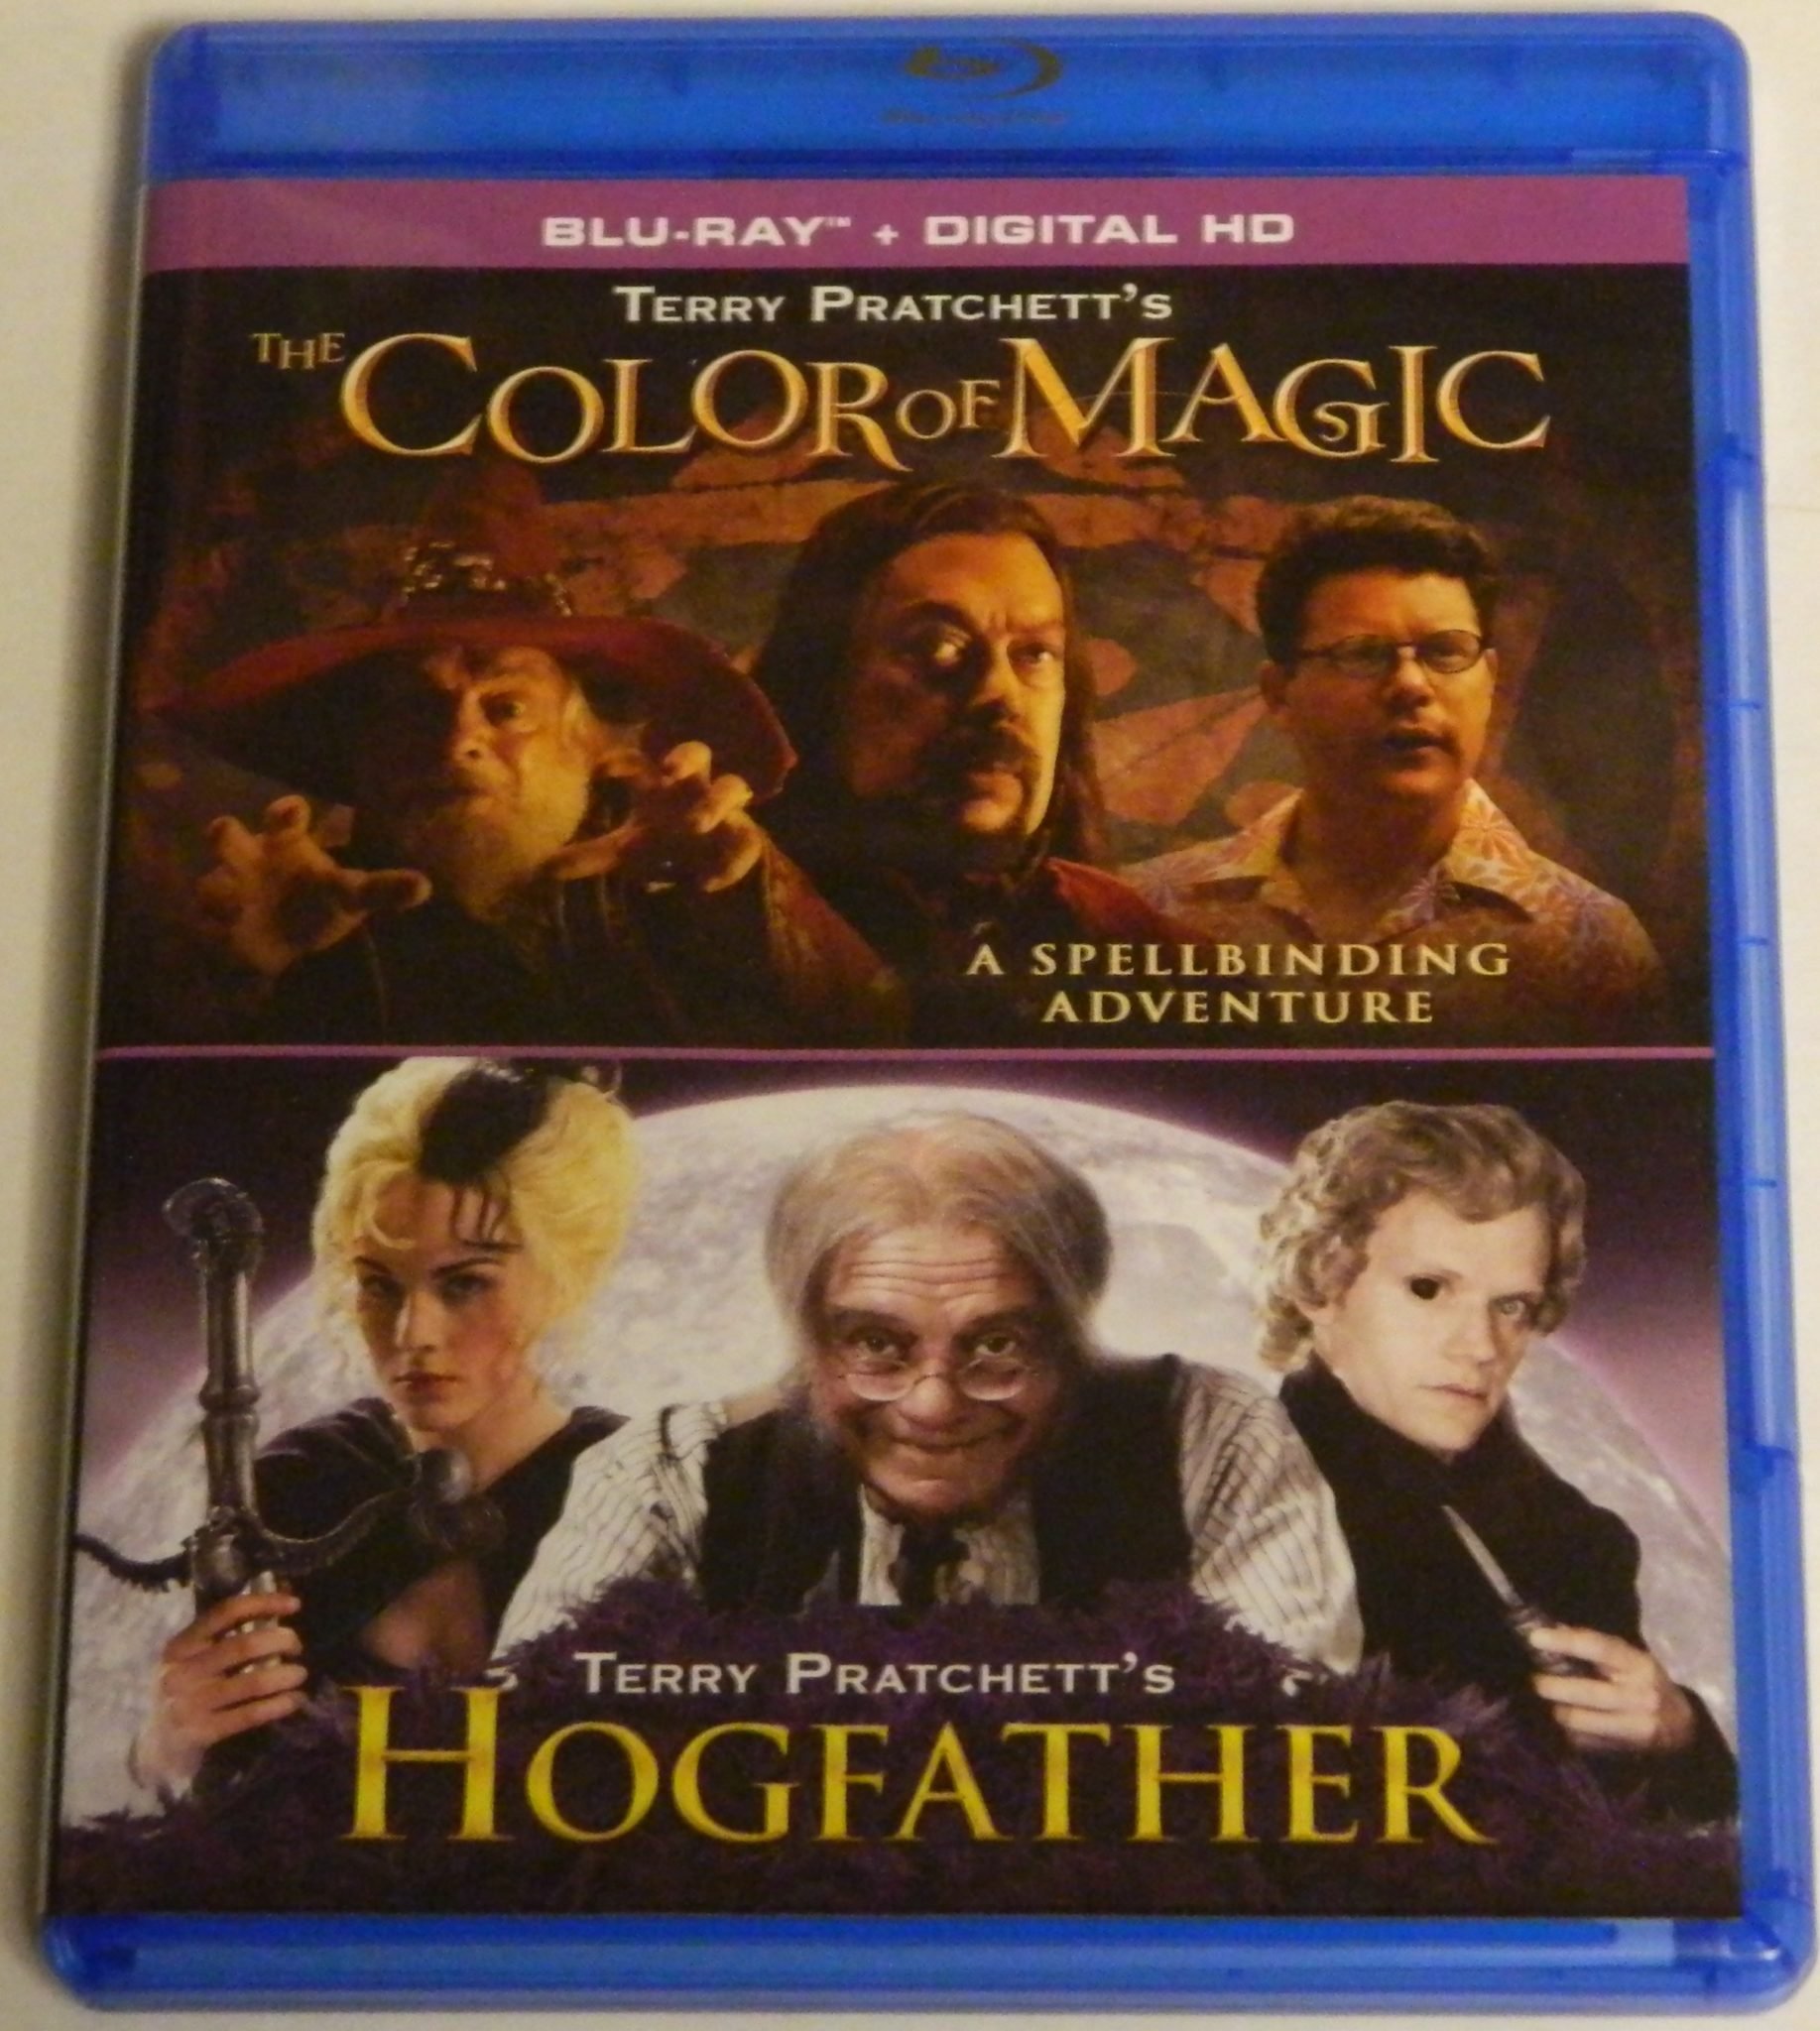 The Color of Magic/Hogfather Double Feature Blu-ray Review